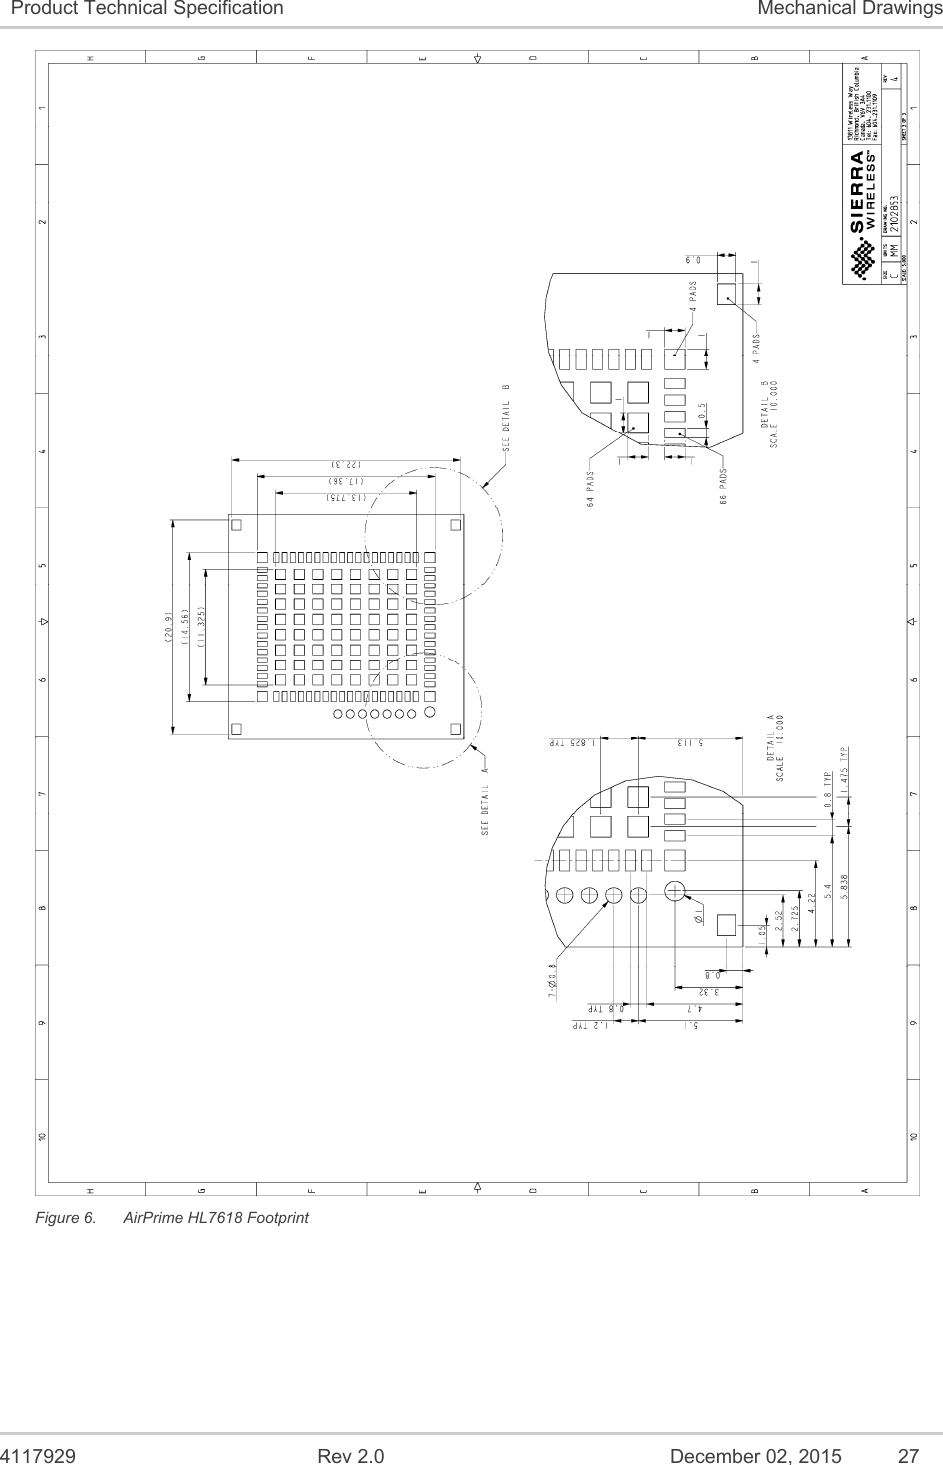  4117929  Rev 2.0  December 02, 2015  27 Product Technical Specification  Mechanical Drawings  Figure 6.  AirPrime HL7618 Footprint 